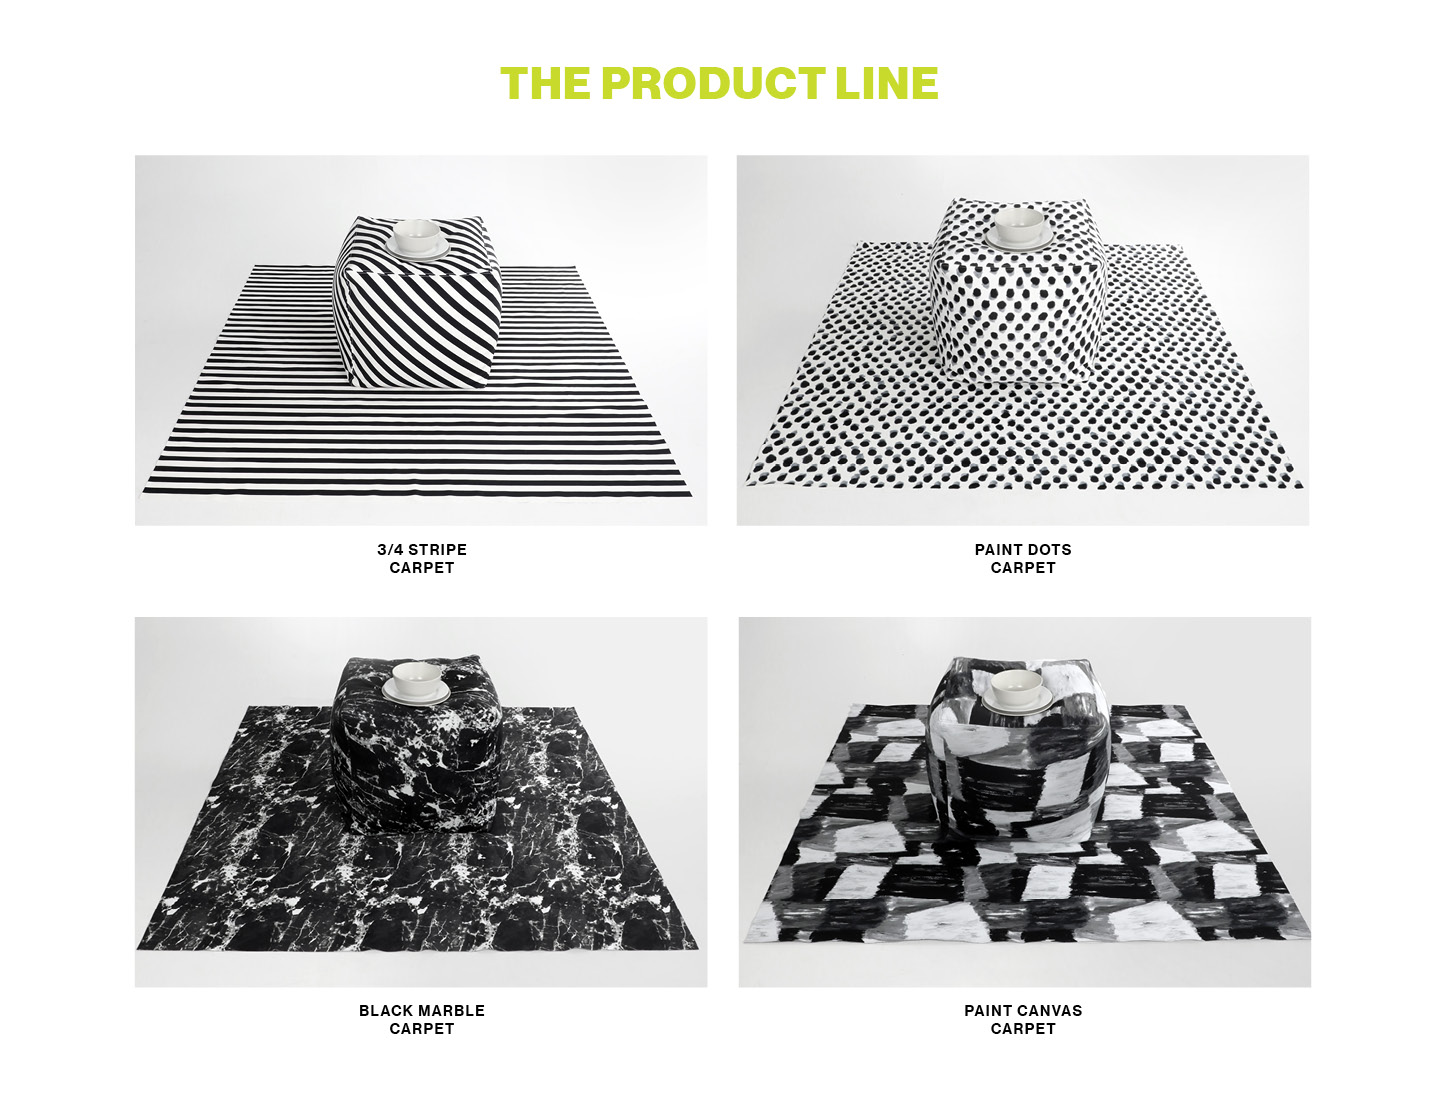 The Carpet product line